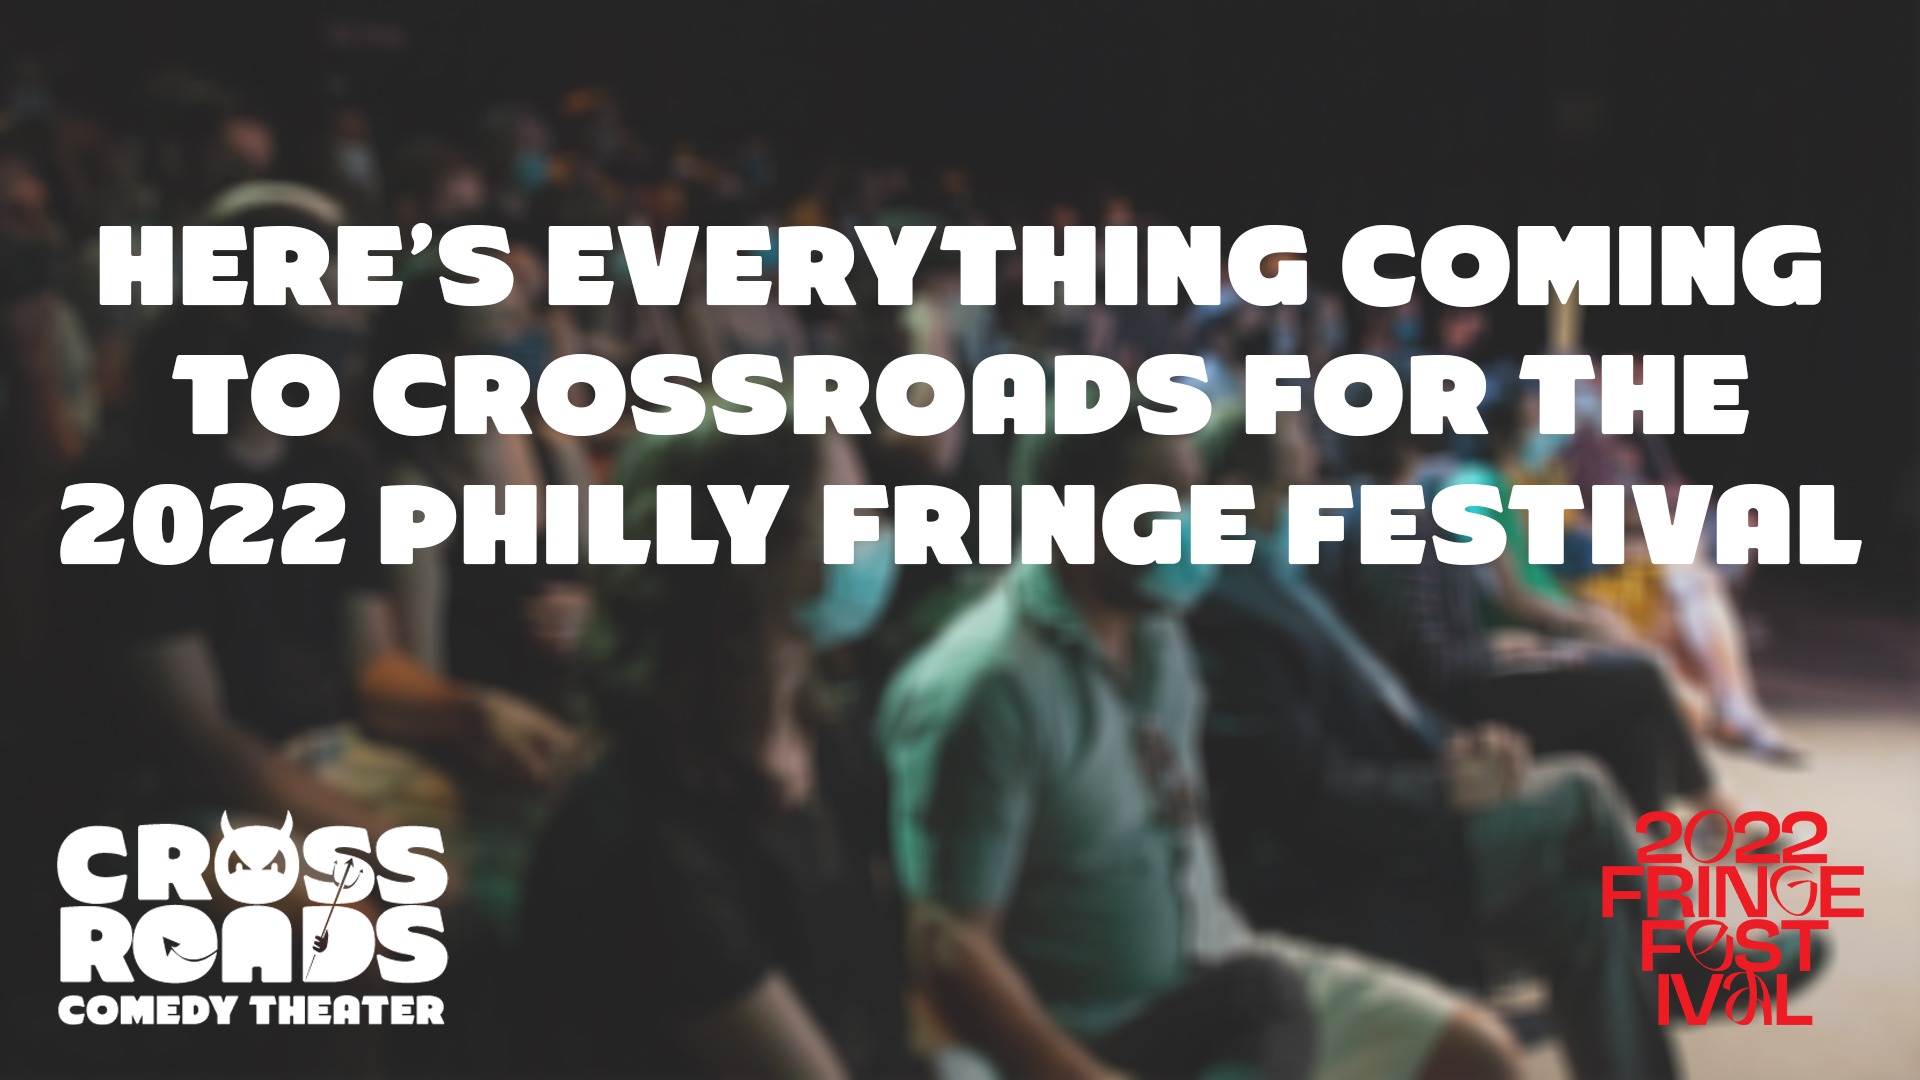 Here’s Everything Coming to Crossroads for the 2022 Philly Fringe Festival!